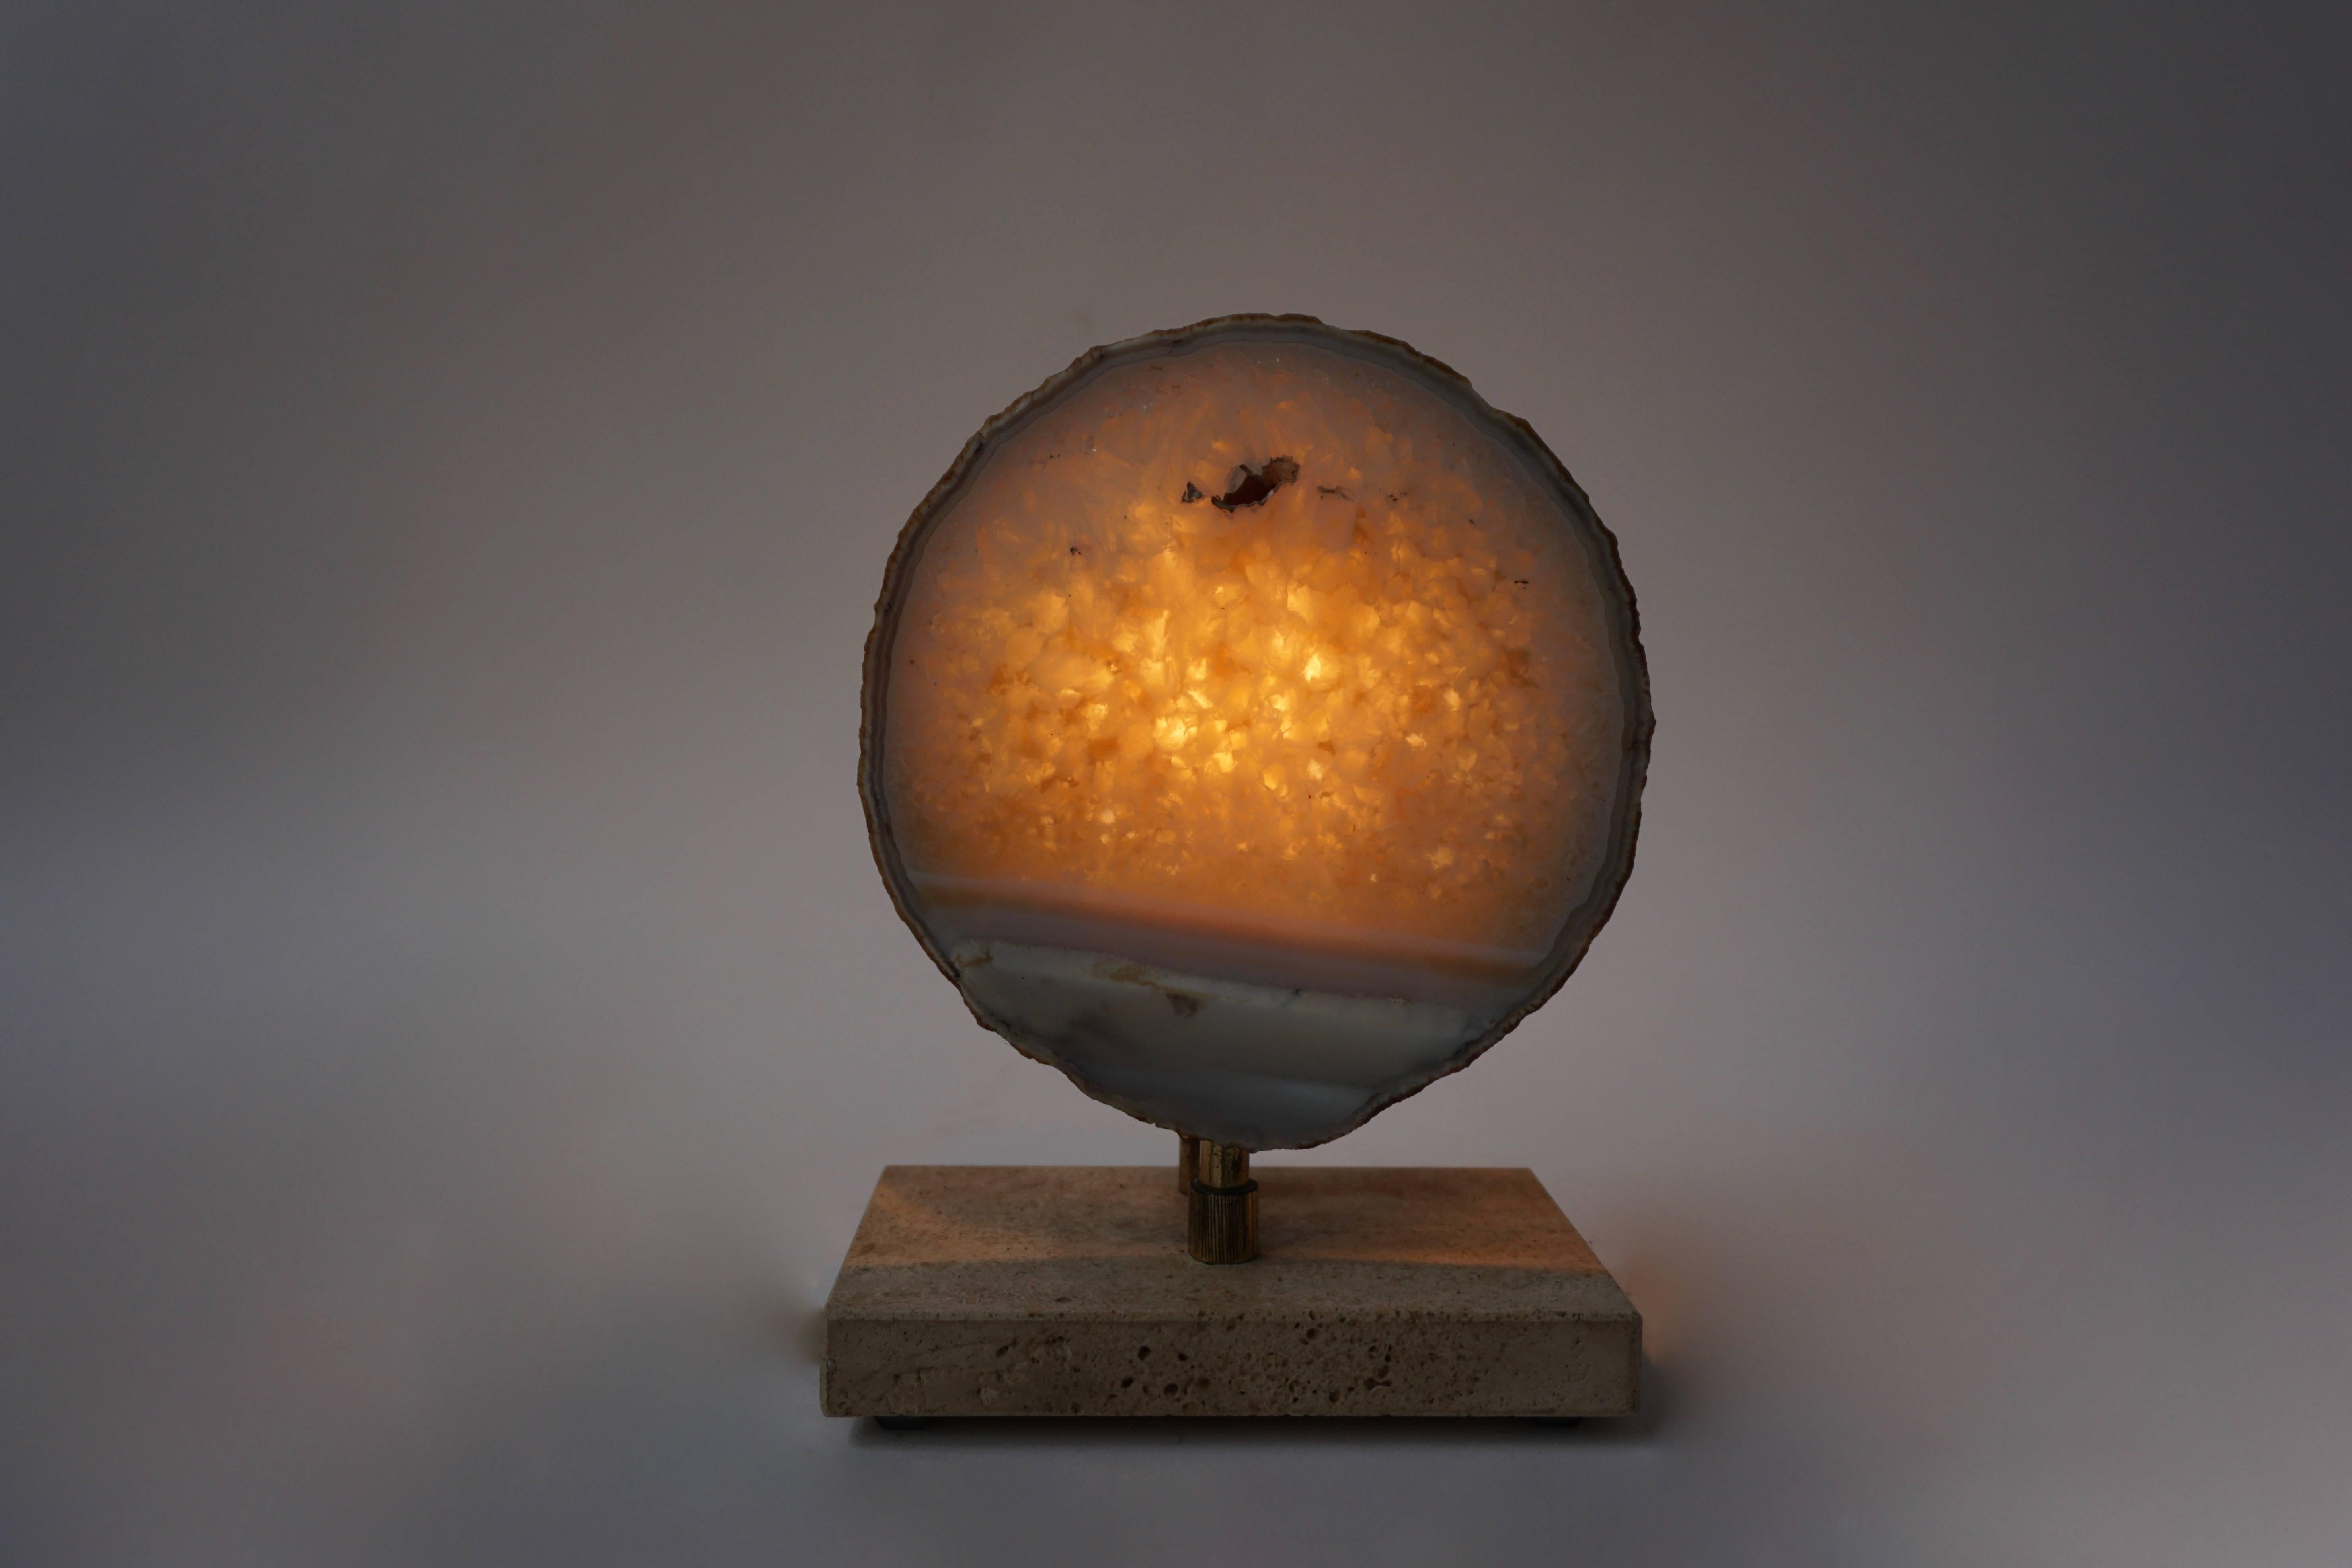 Pierre Faveere Agate Table Lamp

Materials: Rectangular travertine, limestone base. Some brass parts and rod. Round slice lampshade, made of a densely grown agate geode, probably from the quarries around Idar-Oberstein in Germany. Yellow, white,